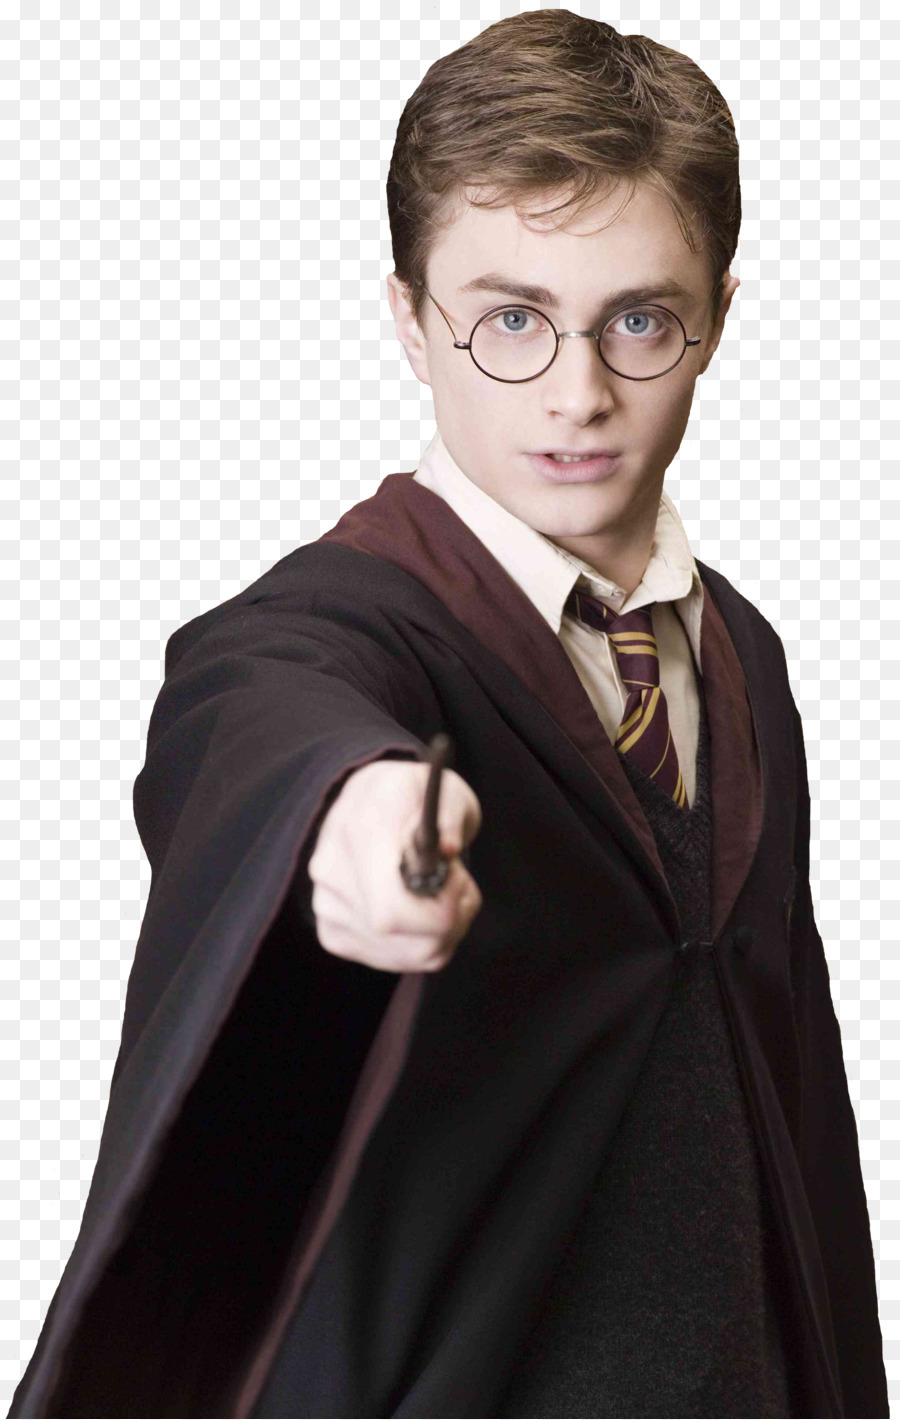 Harry Potter and the Deathly Hallows Harry Potter and the Cursed Child Ron Weasley Hermione Granger - Harry Potter png download - 900*1419 - Free Transparent Harry Potter png Download.